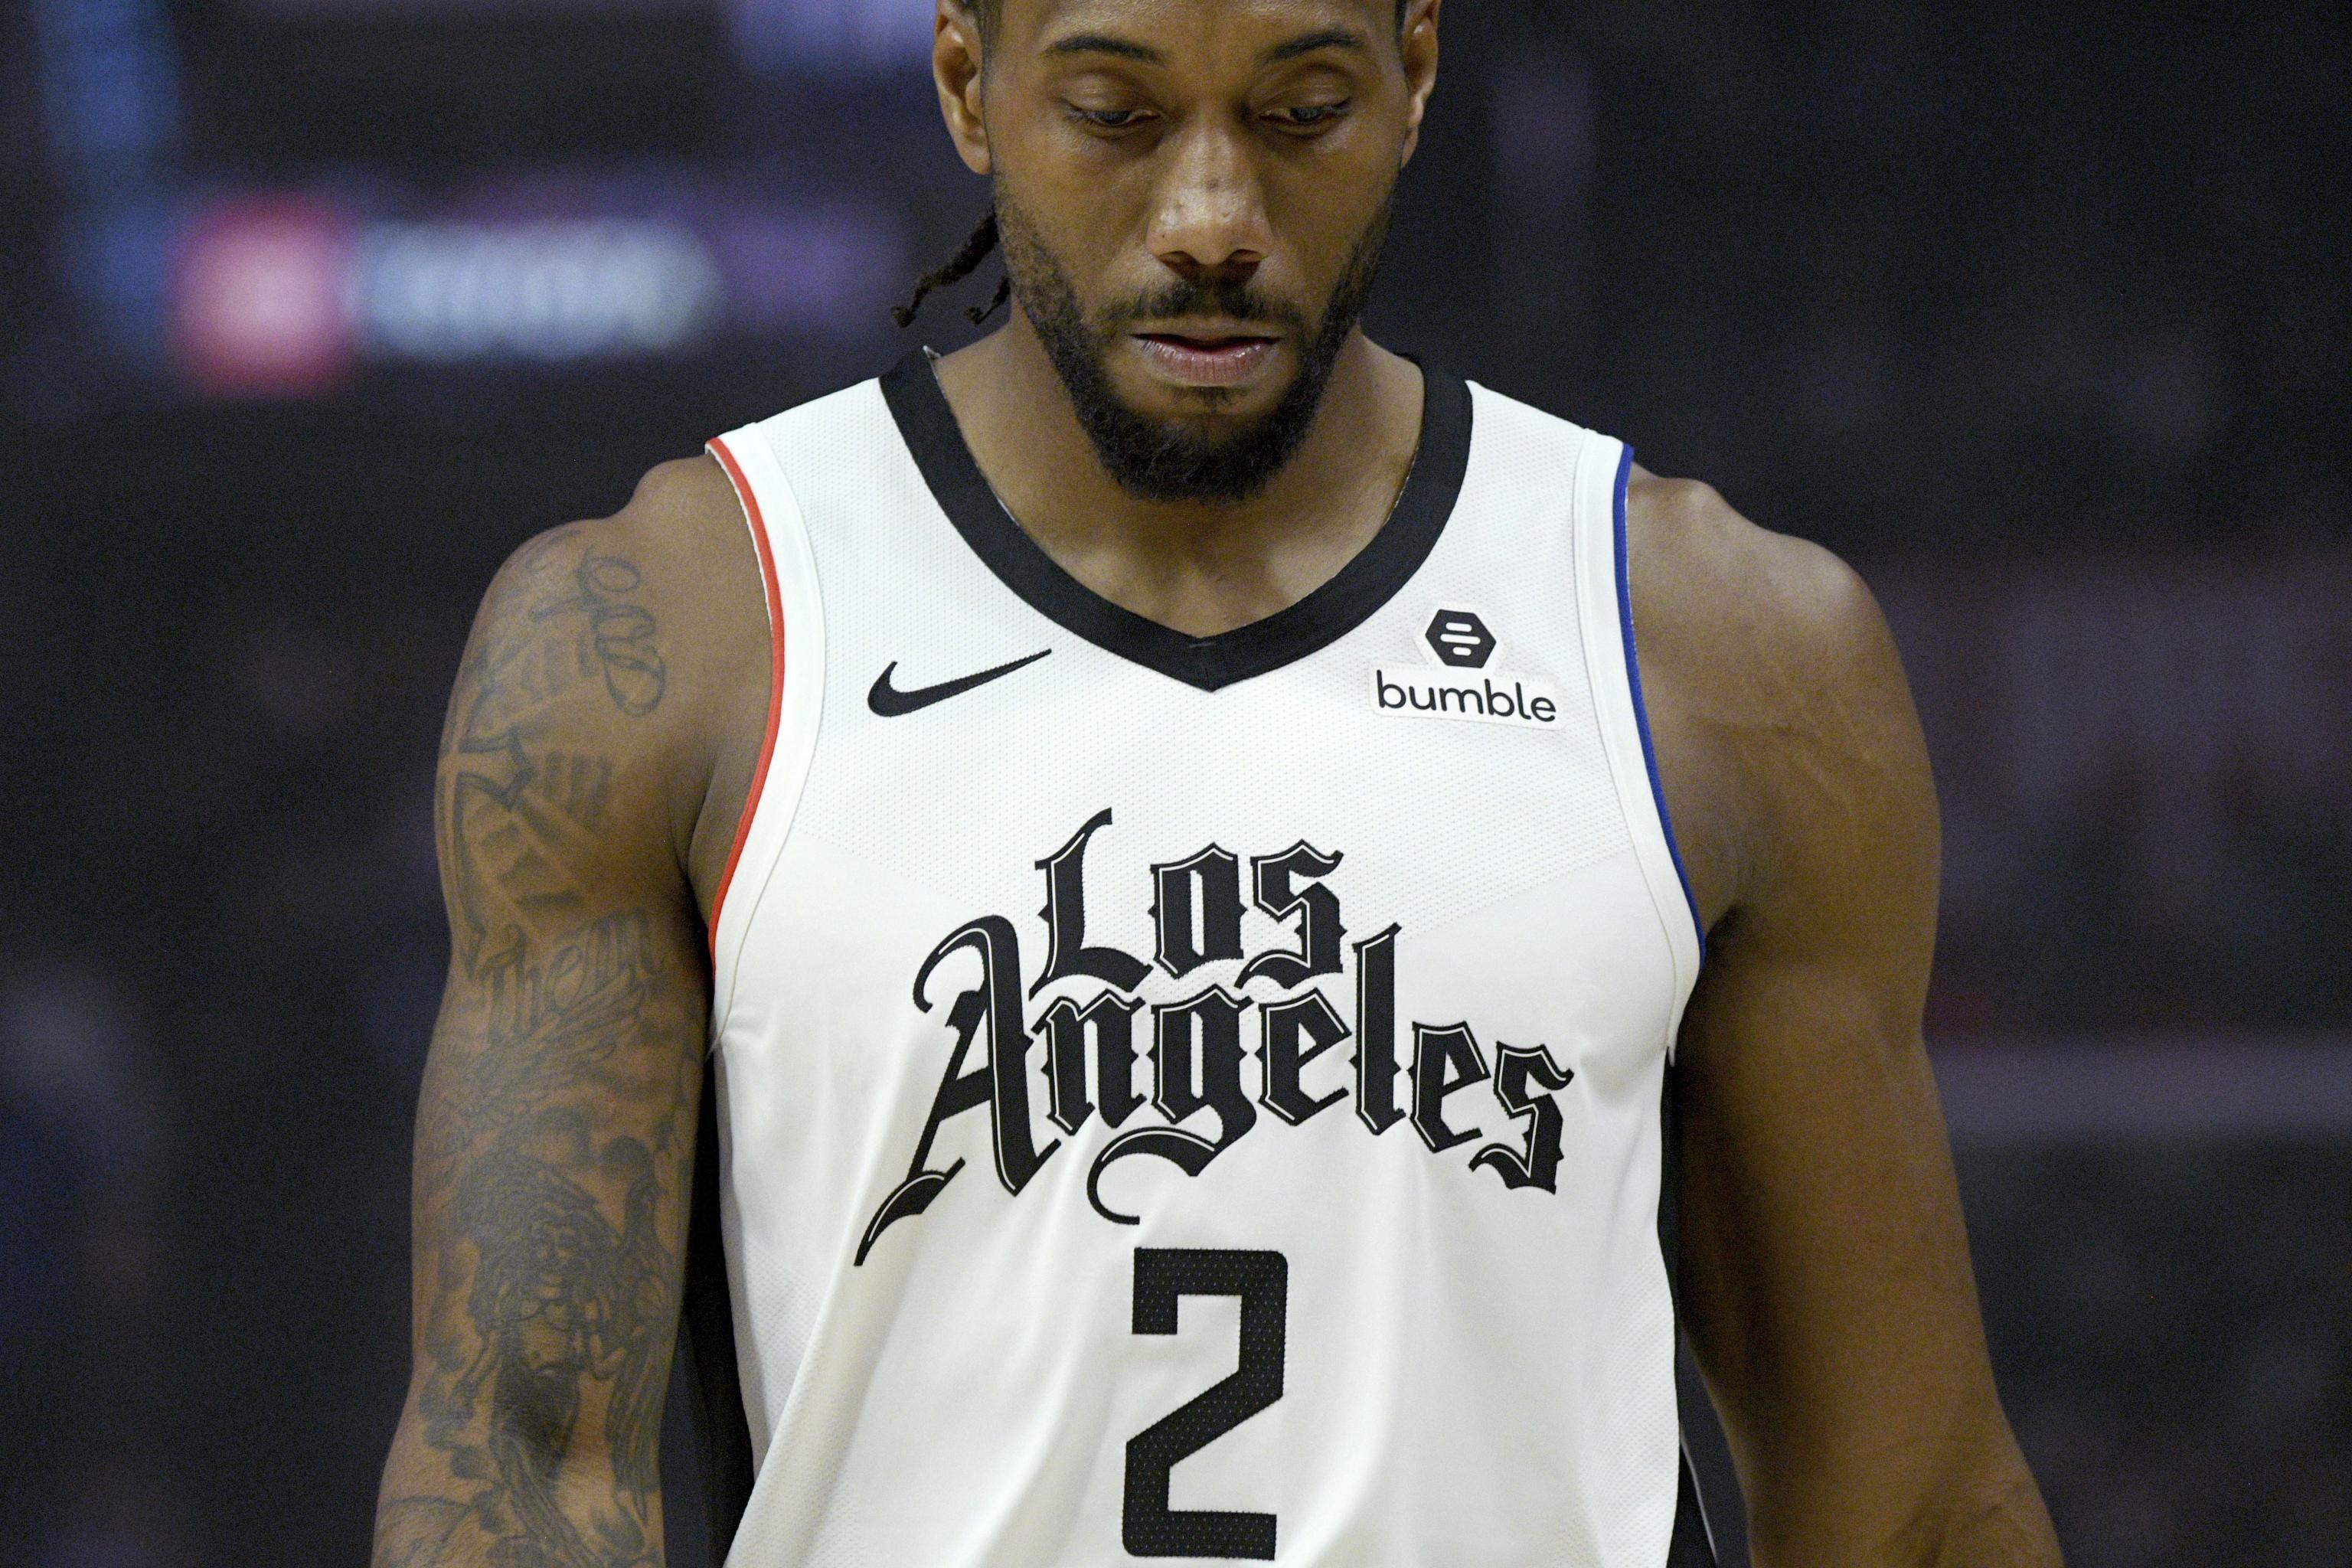 FIRST LOOK: Clippers' New White and Blue Jerseys Designed by Nike - Clips  Nation